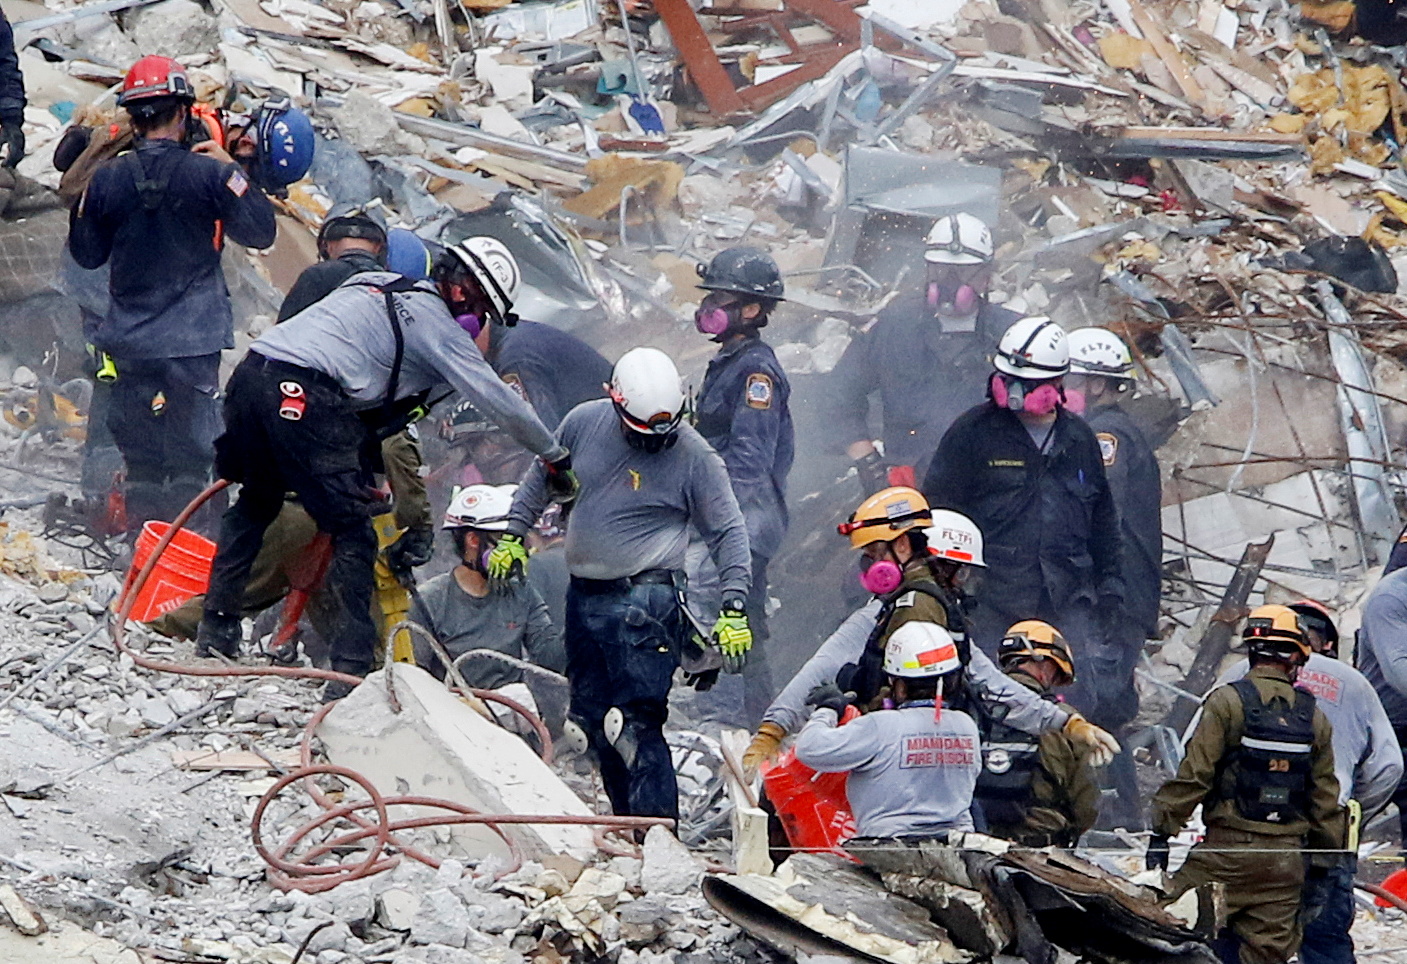 Emergency workers conduct search and rescue efforts at the site of a partially collapsed residential building in Surfside, near Miami Beach, Florida, U.S. June 29, 2021. REUTERS/Joe Skipper